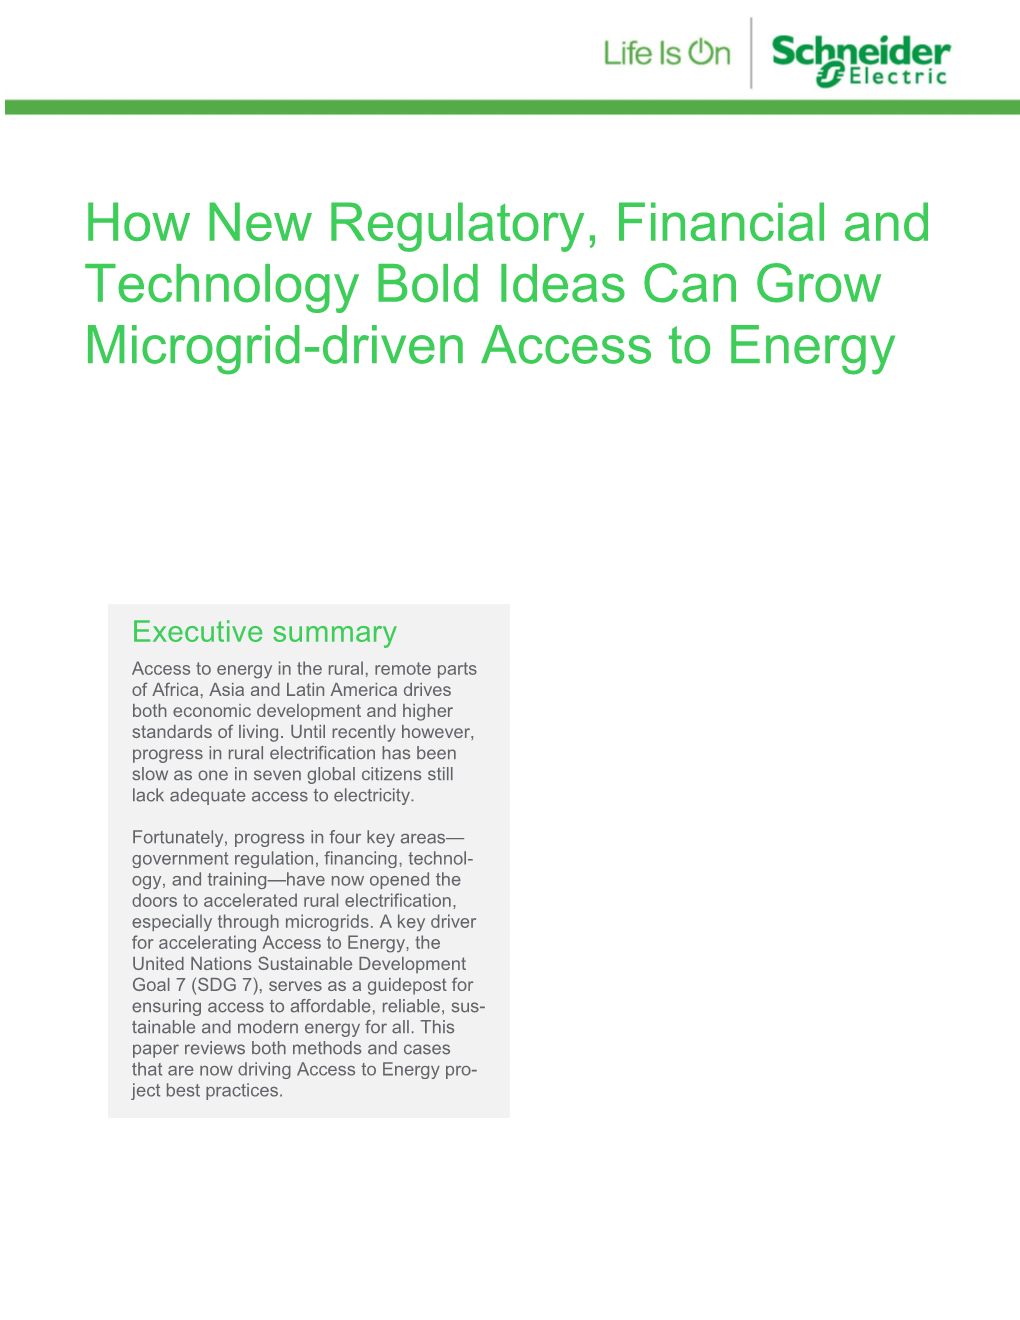 How New Regulatory, Financial and Technology Bold Ideas Can Grow Microgrid-Driven Access to Energy